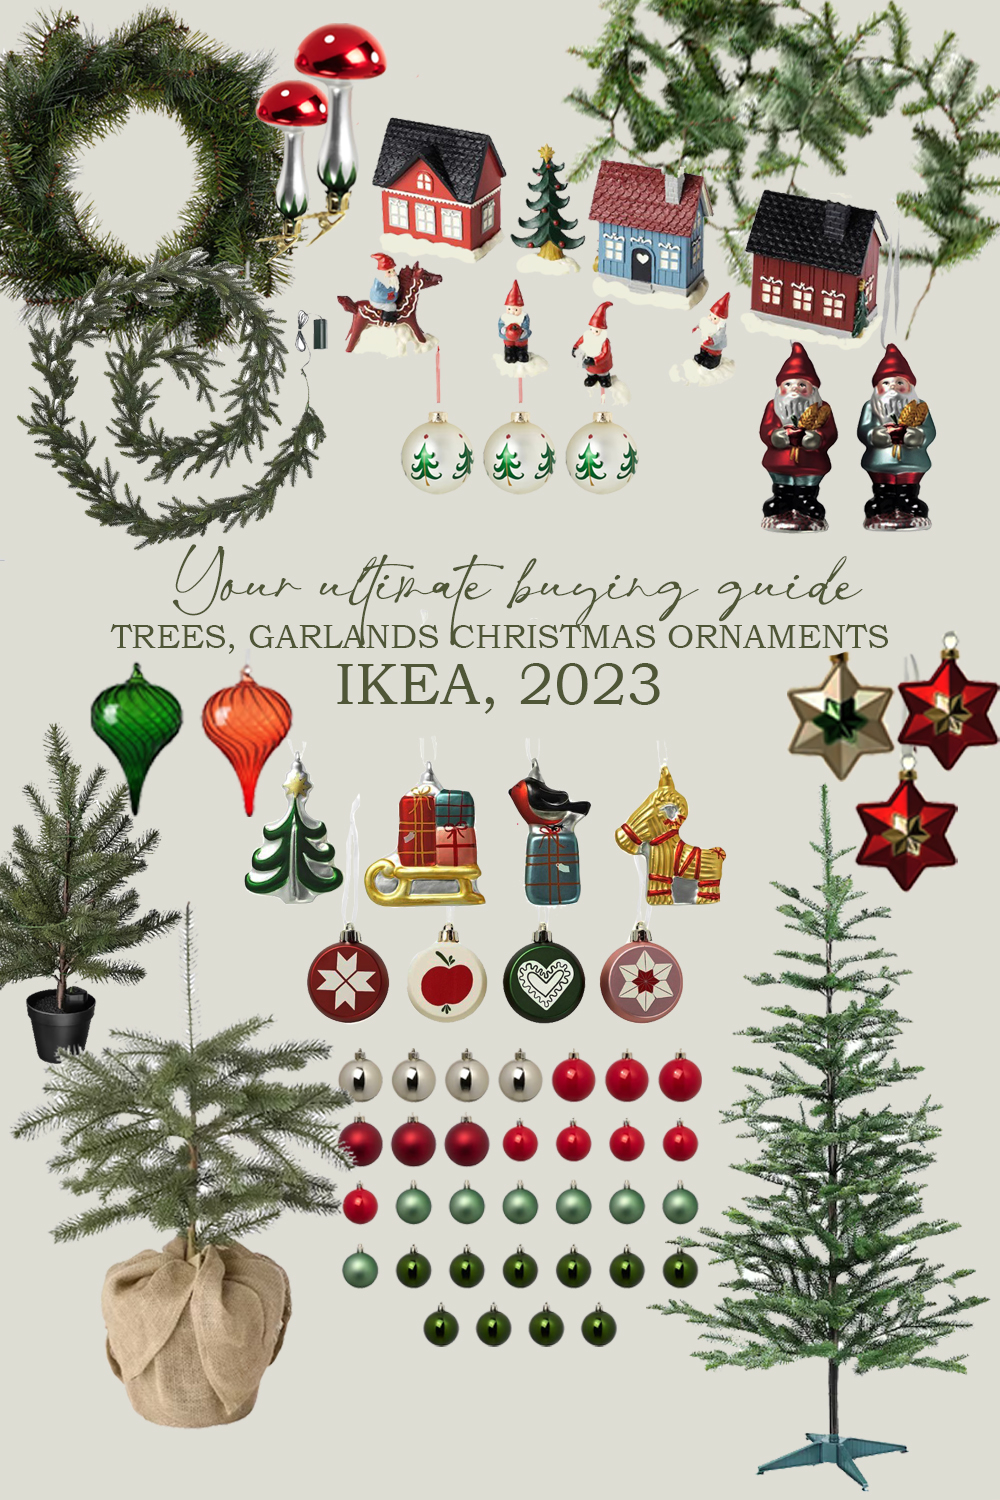 IKEA buying guide for Christmas